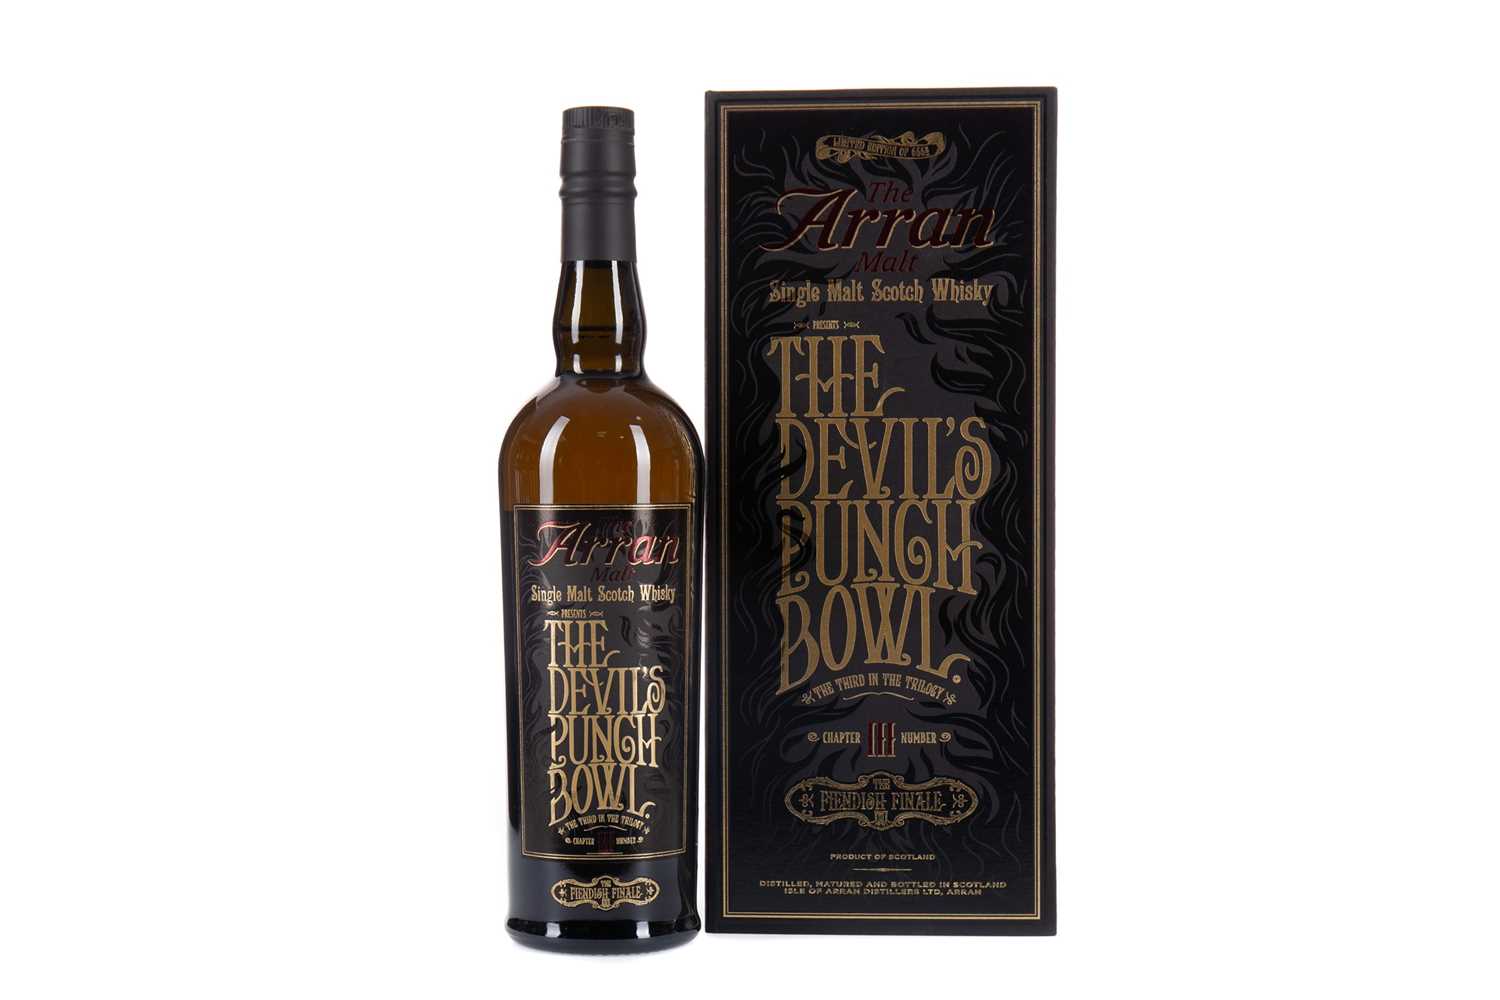 Lot 22 - ARRAN THE DEVIL'S PUNCH BOWL CHAPTER III